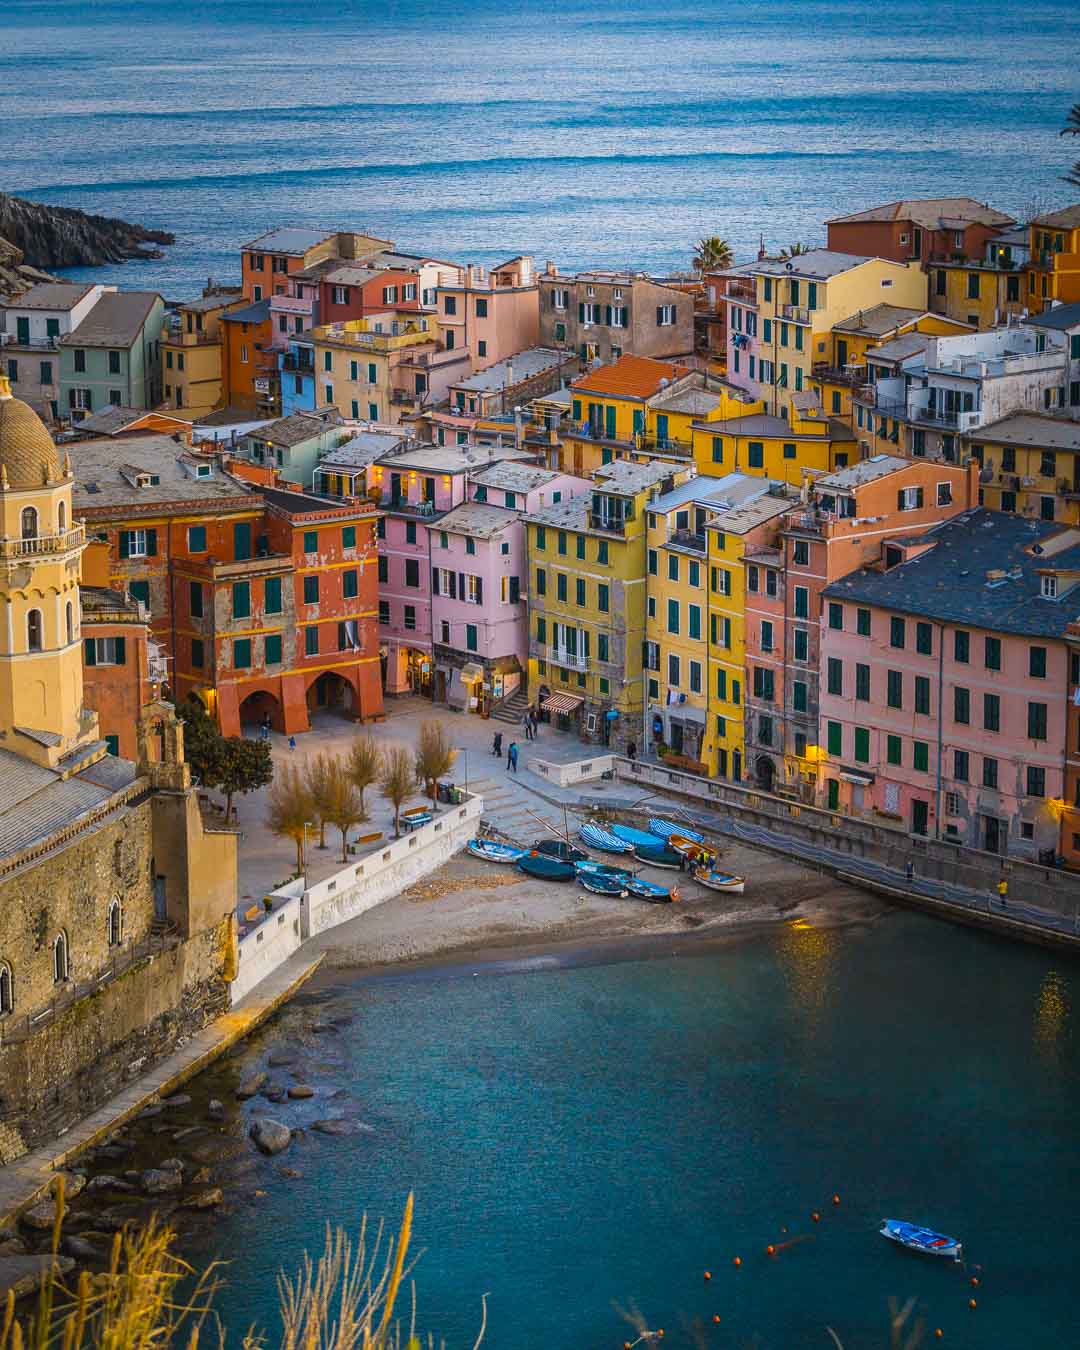 vernazza one of the treasures of italy